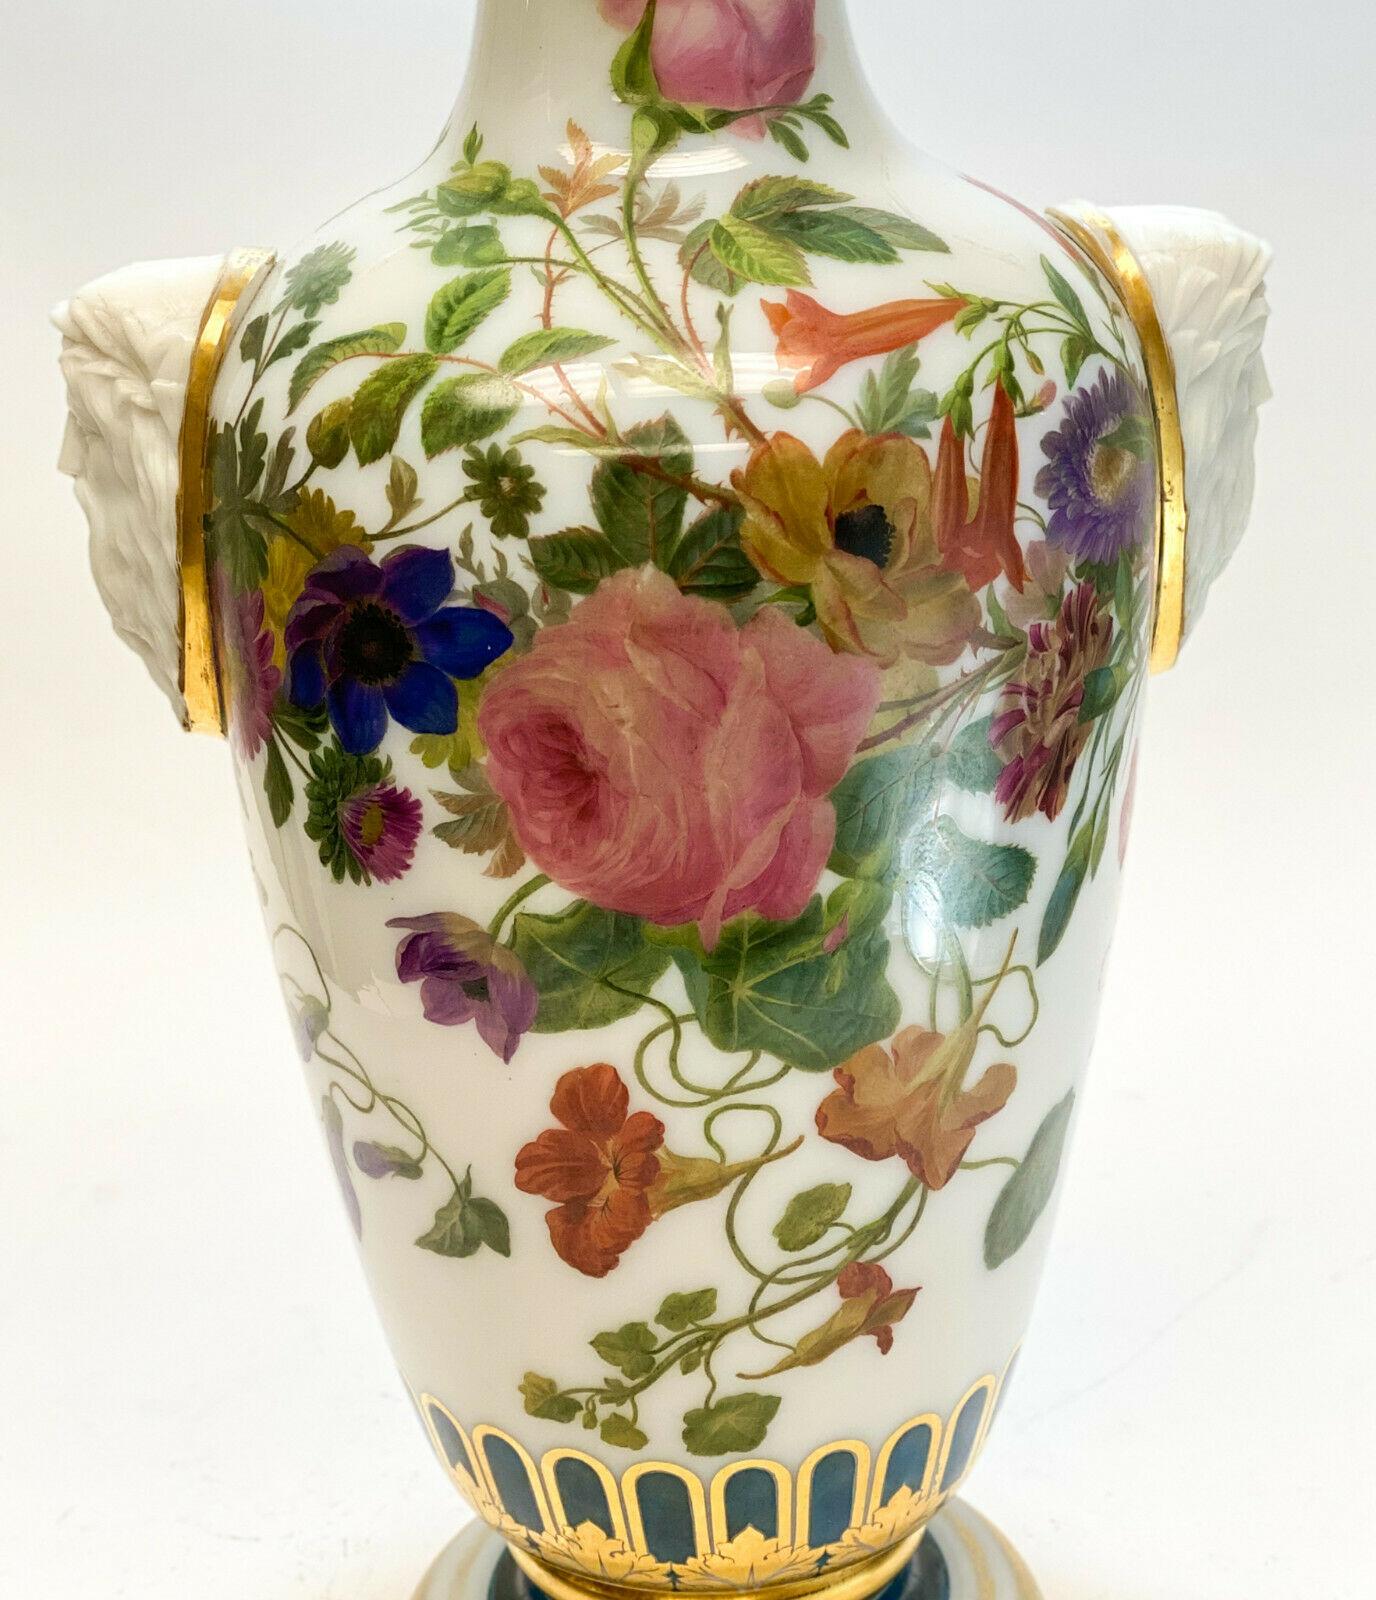 A large Baccarat white opaline hand painted vase, circa 1900. Beautiful multicolored hand painted florals throughout the vase with molded figural profile heads of a bearded man to the handles. Gilt accents to the top and base rim. 

Weight